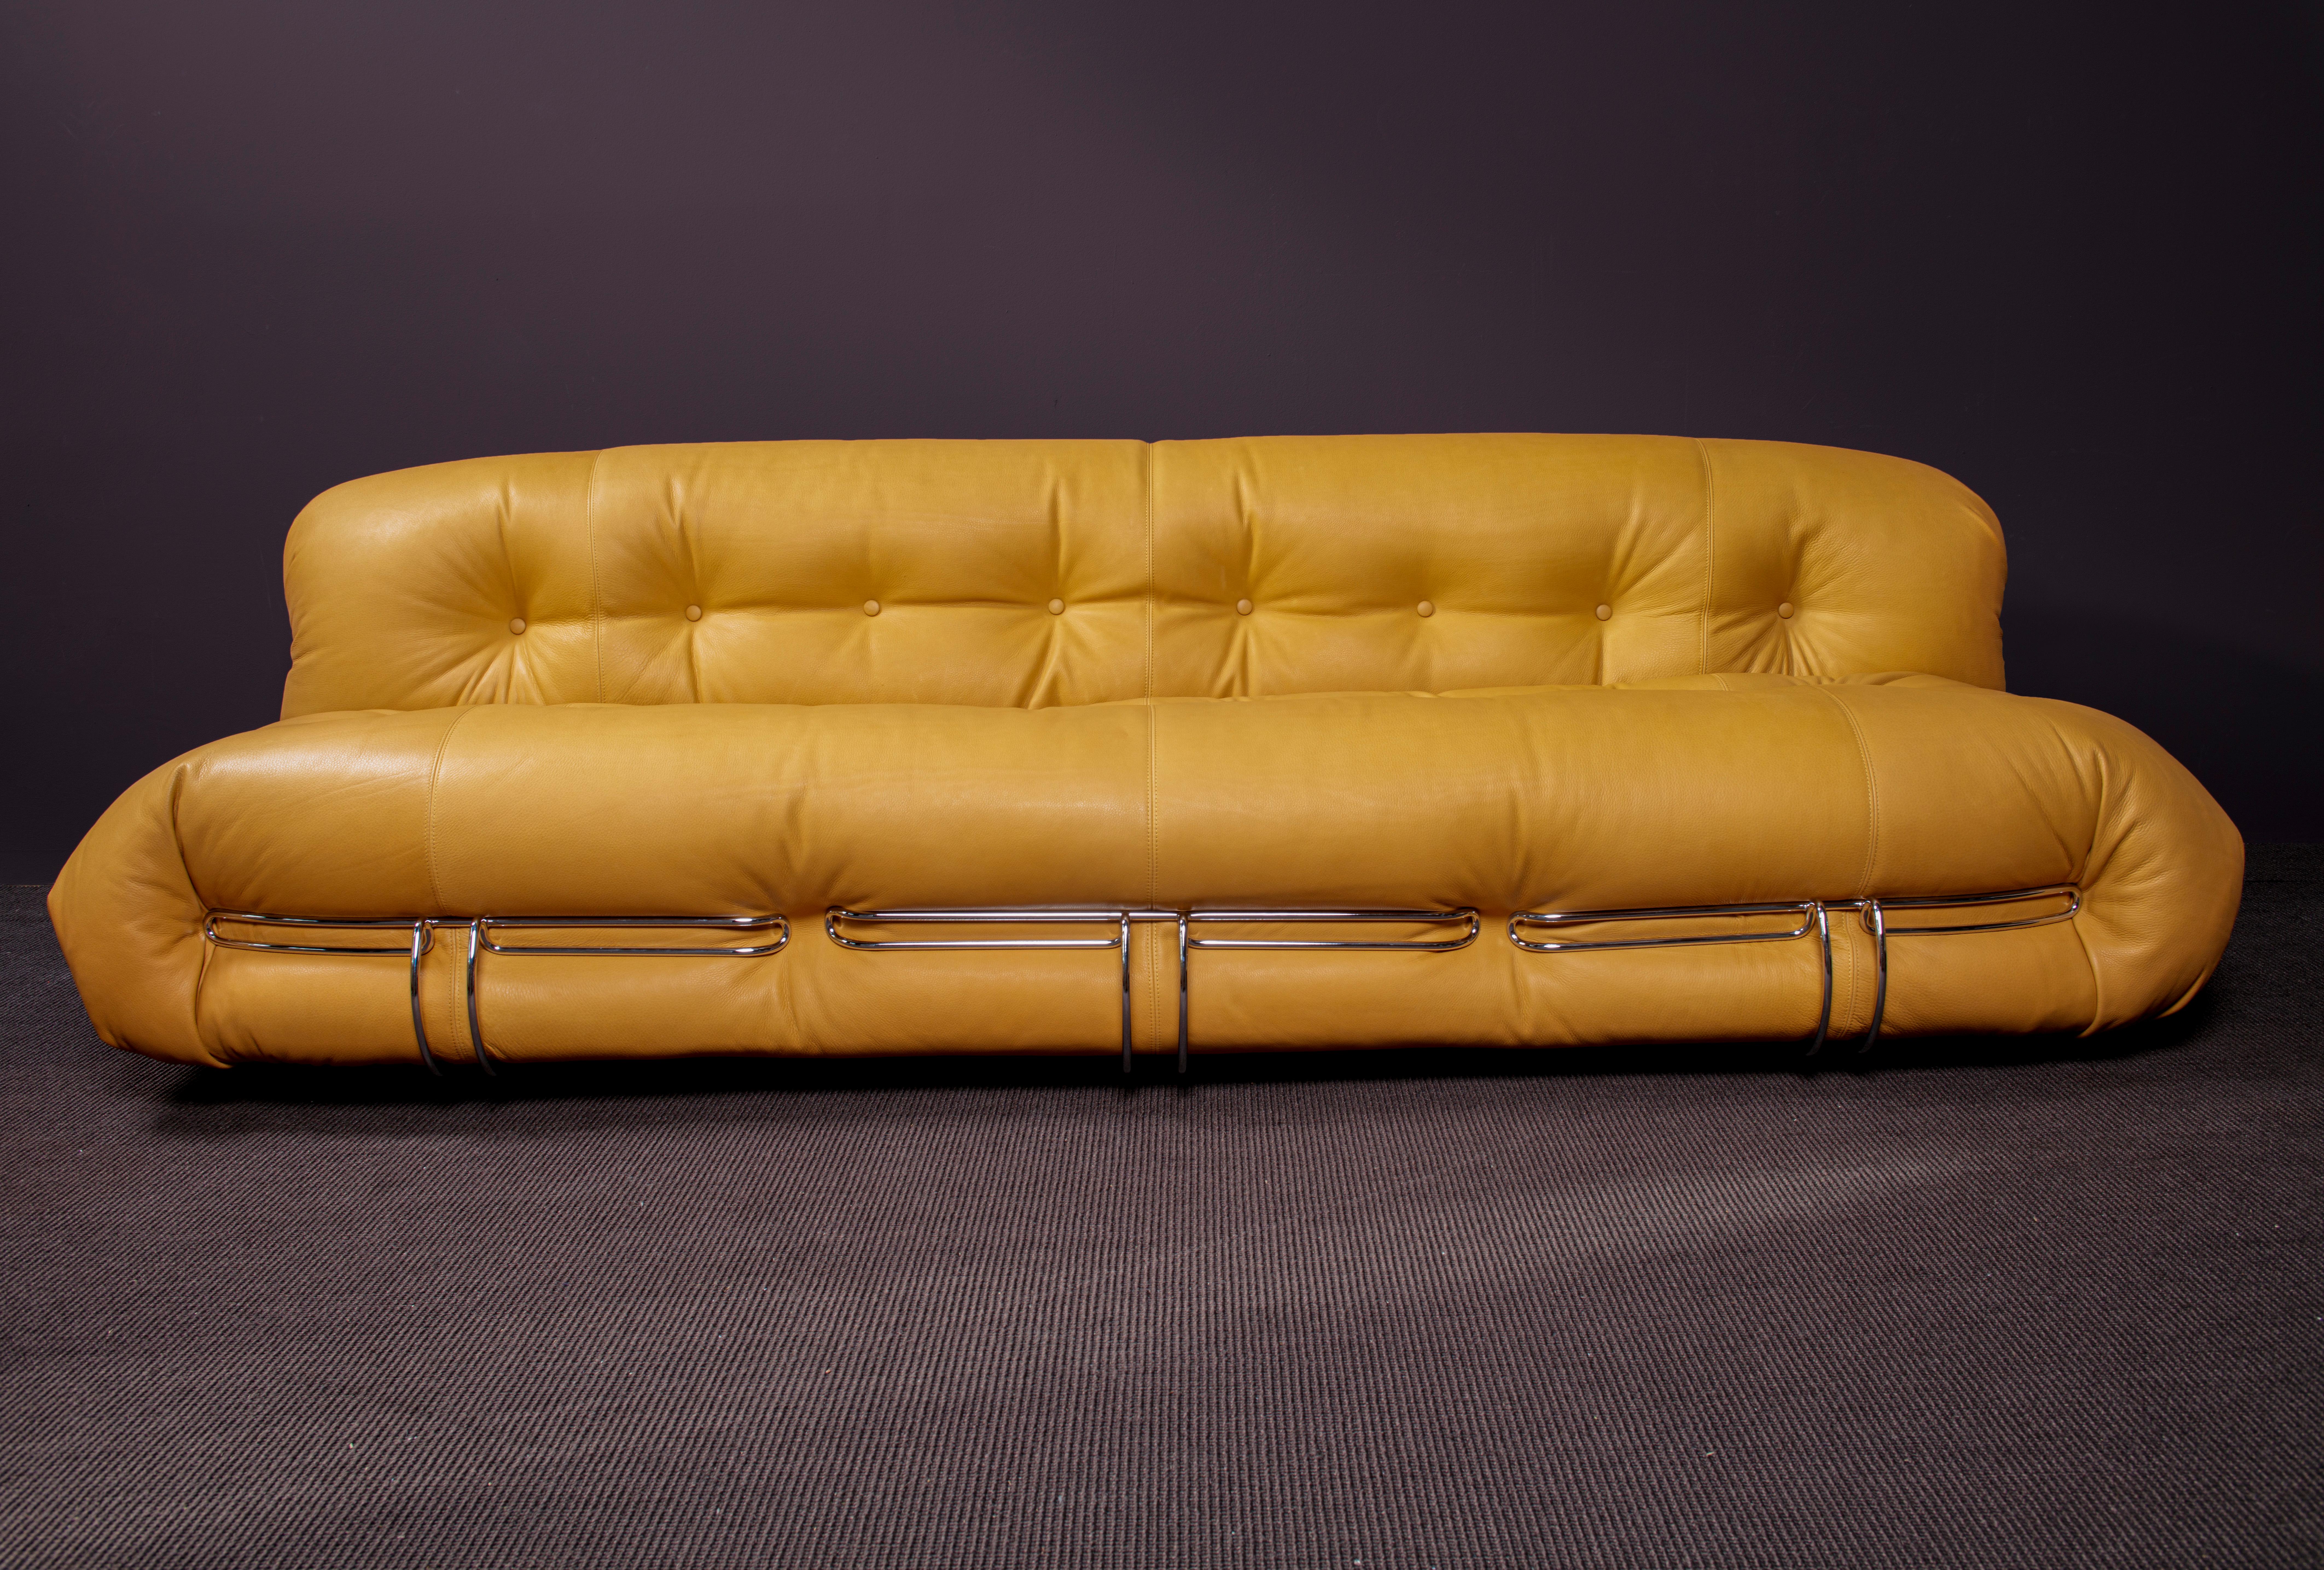 Afra & Tobia Scarpa Soriana Sofa and Ottoman in Light Tobacco Leather by Cassina For Sale 3